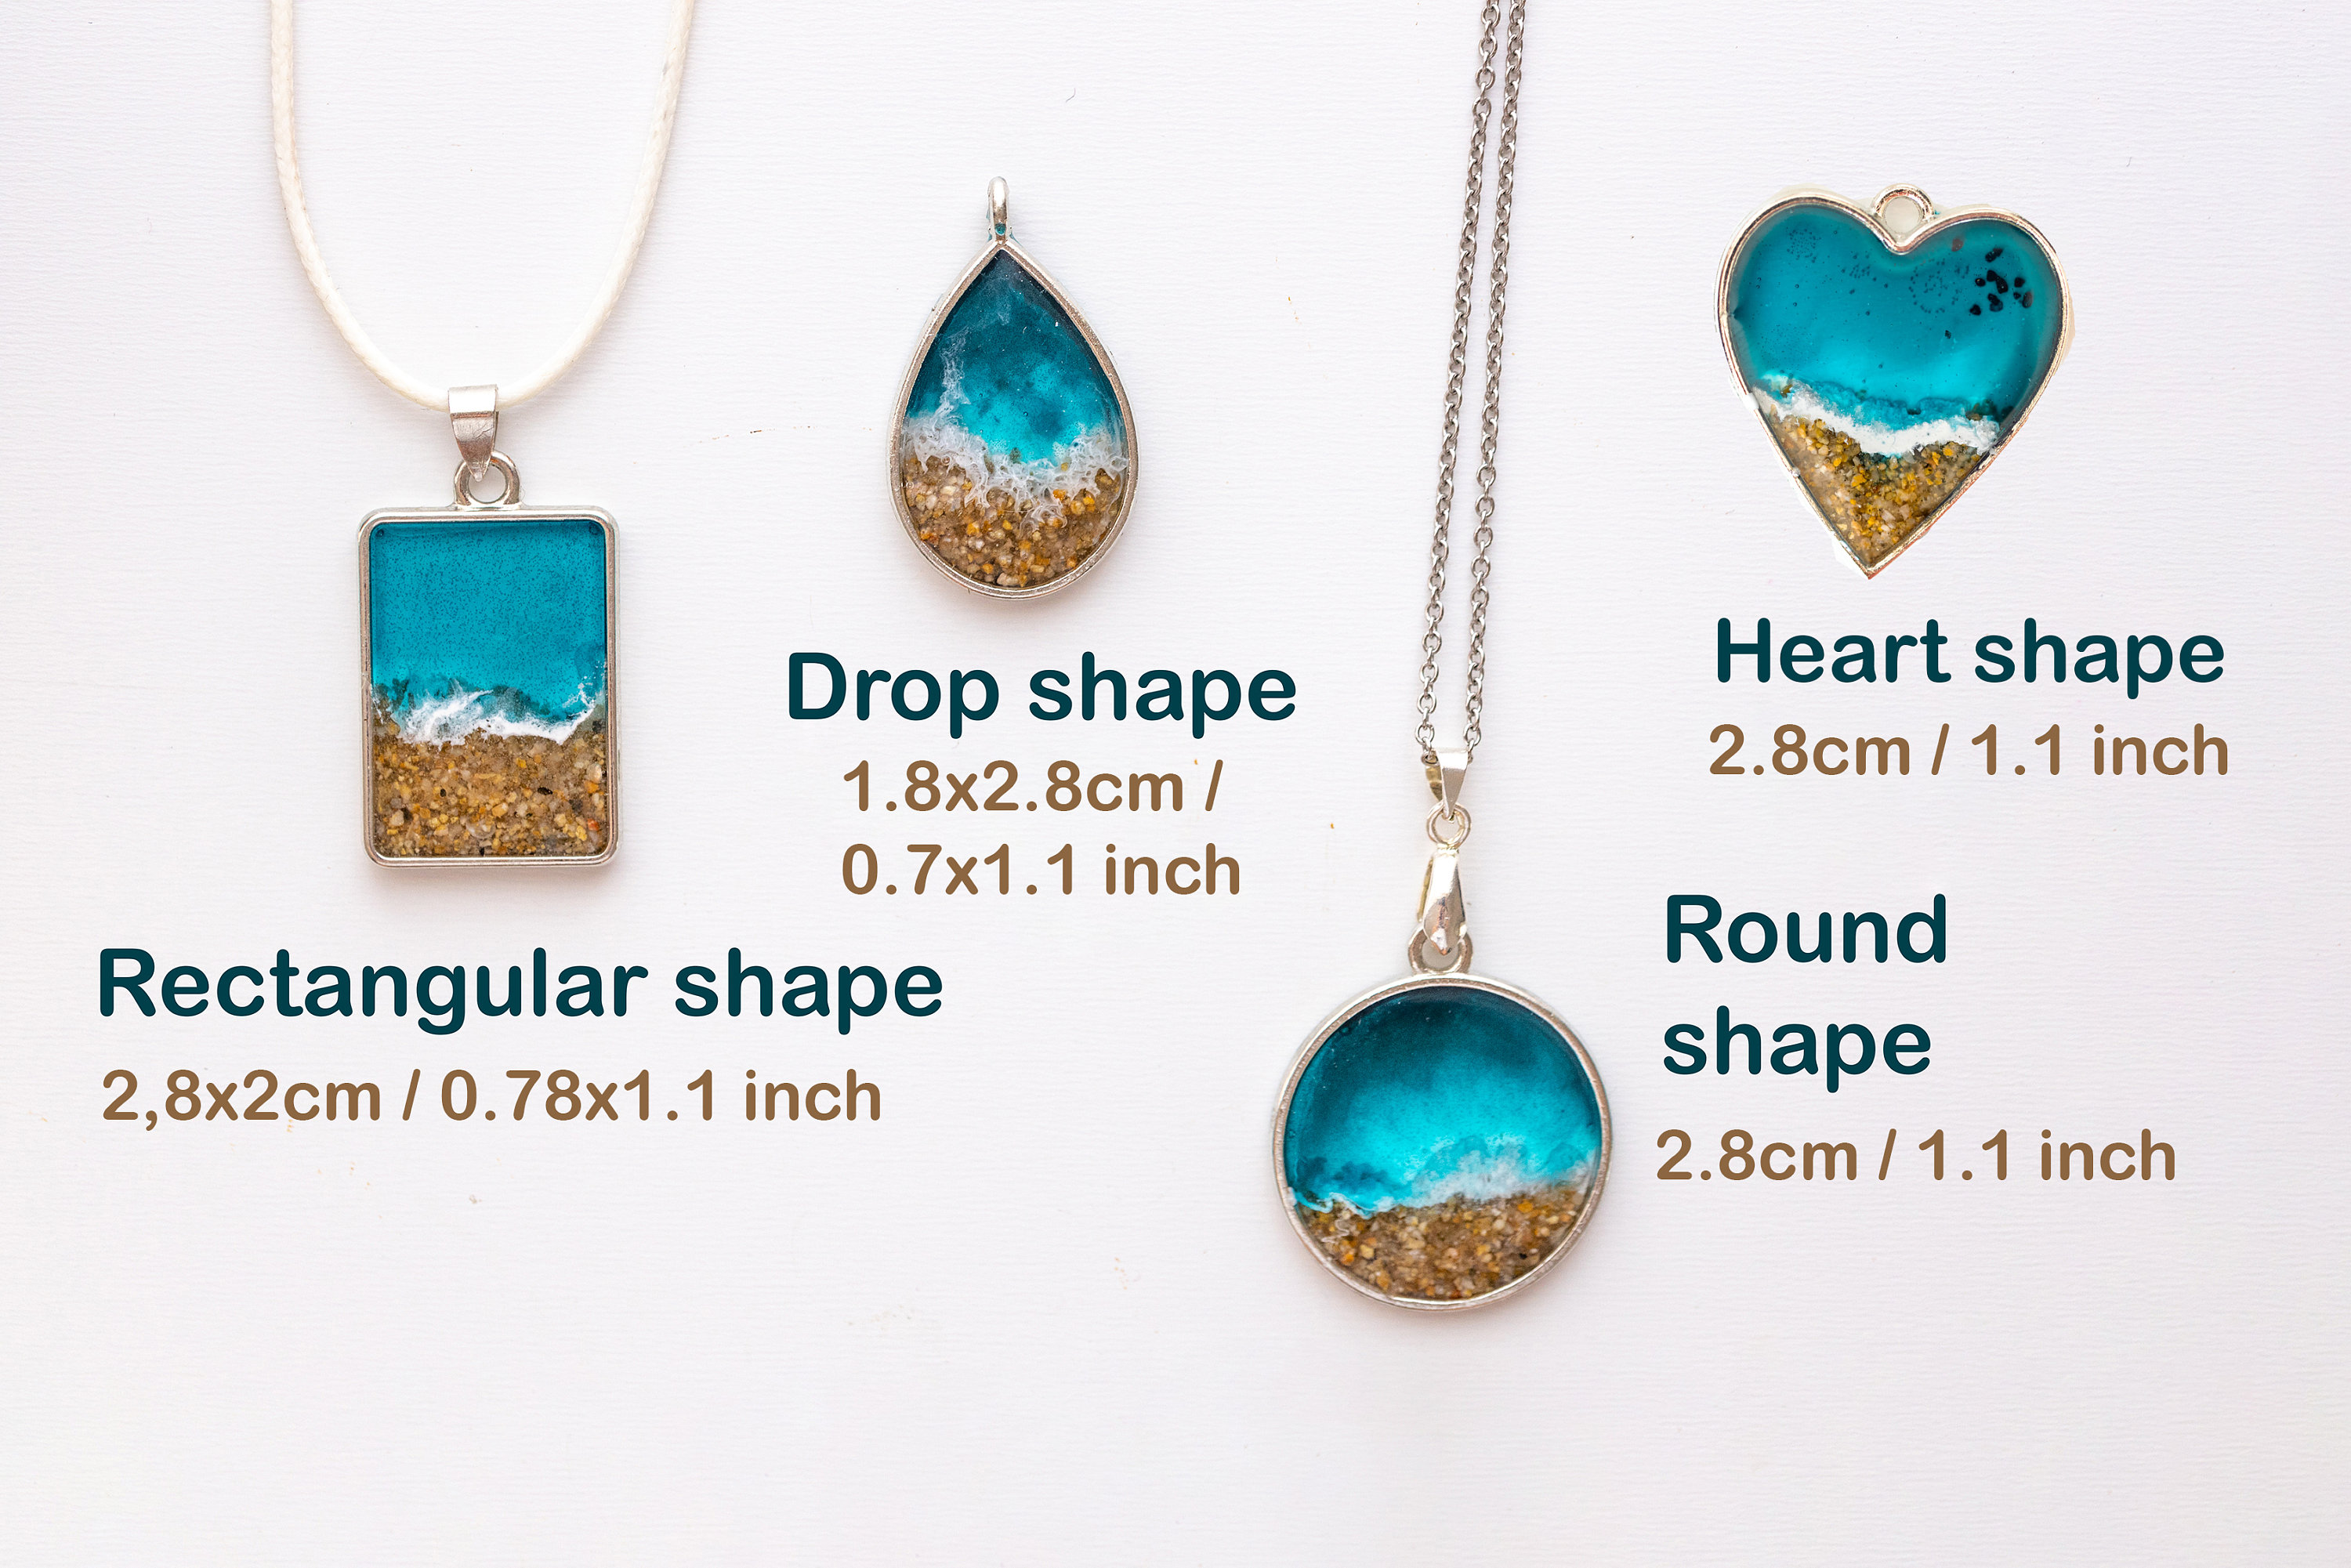 Sea and Sand Jewelry - Restock Alert! Upcycled luxury Louis